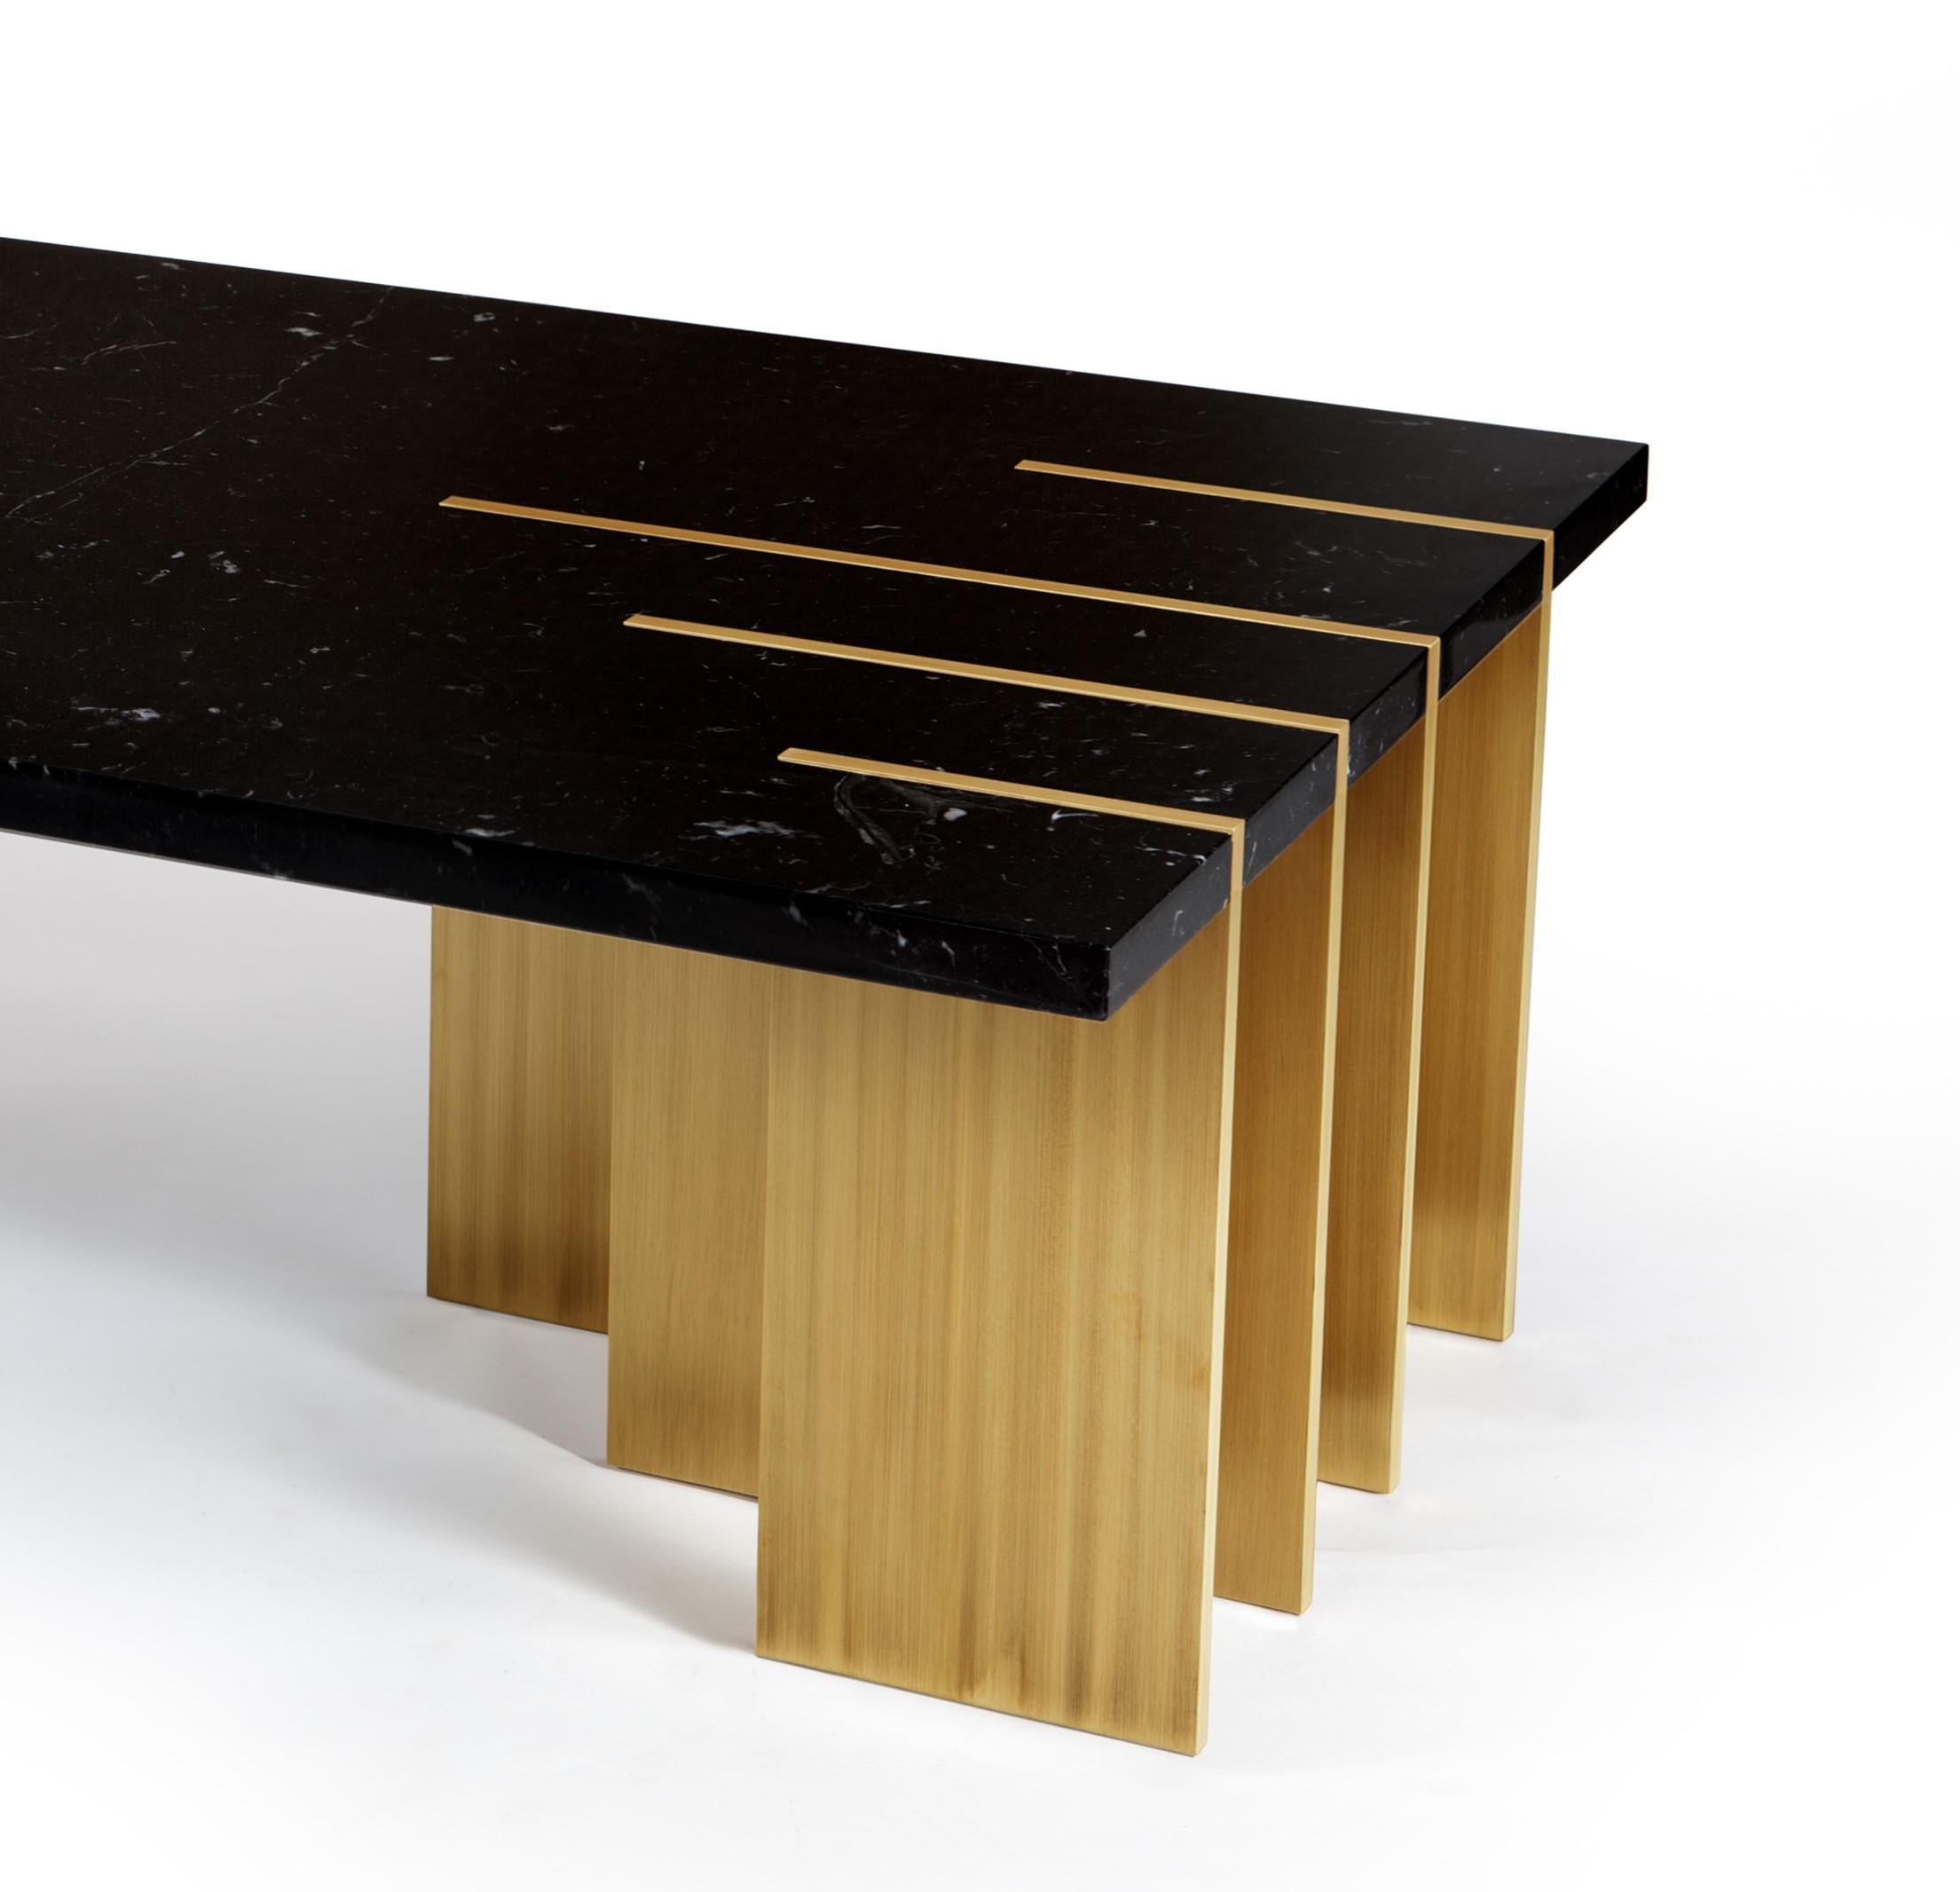 Portuguese Pianist Nero Marquina Marble Coffee Table by InsidherLand For Sale